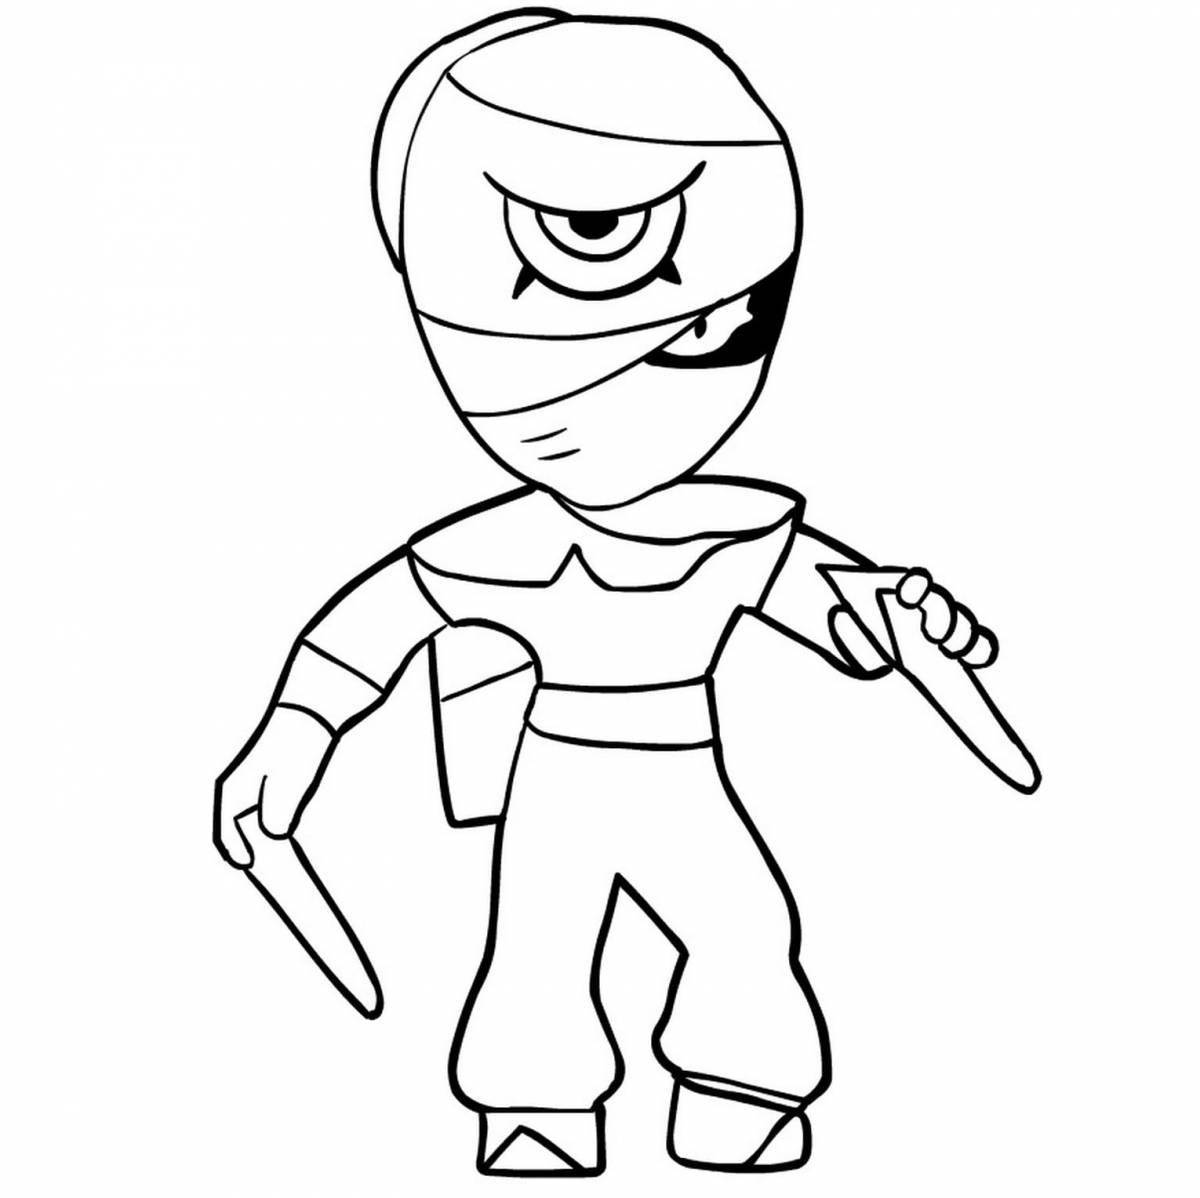 Dynamic gale coloring page